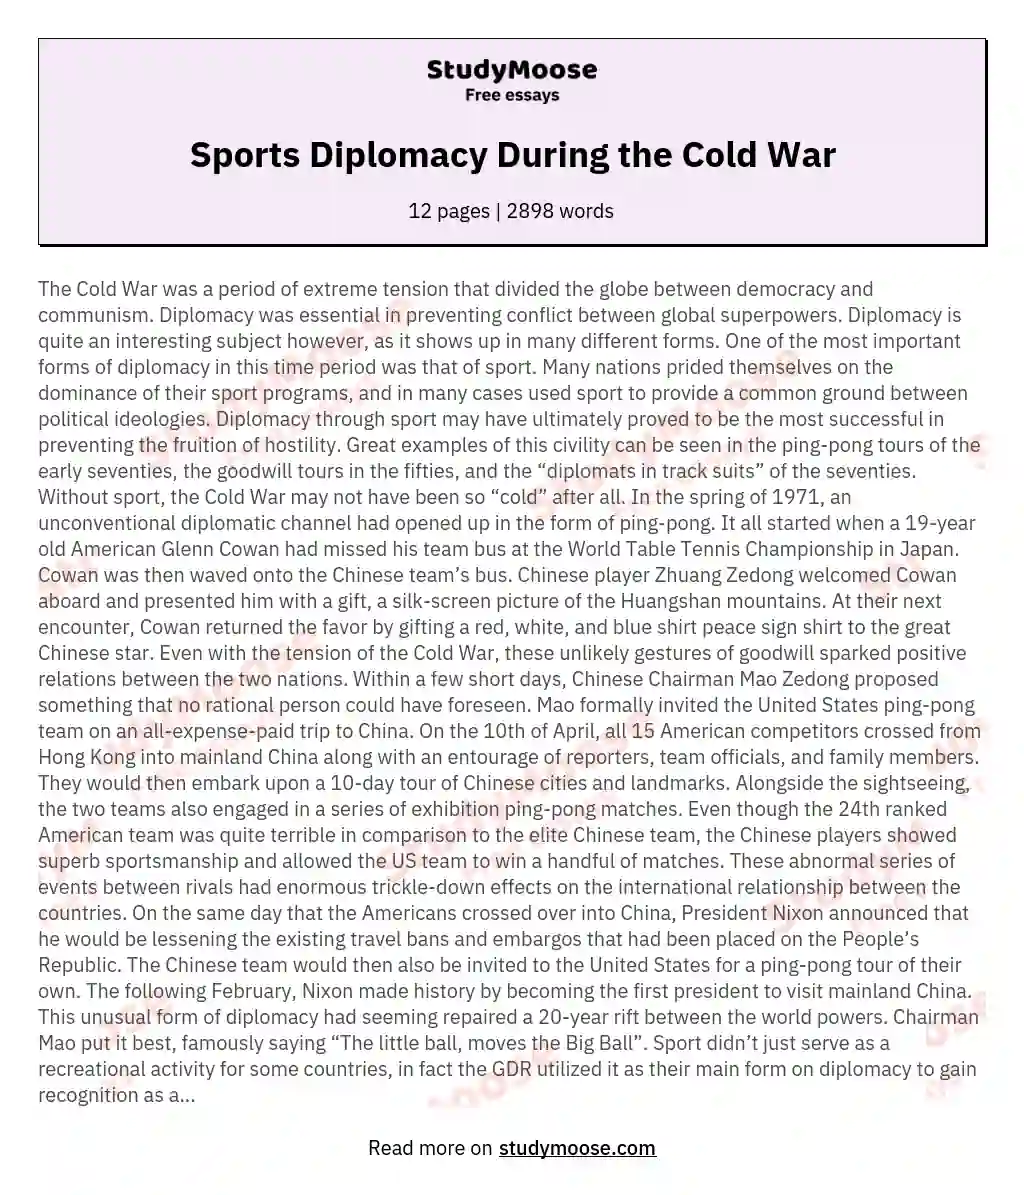 Sports Diplomacy During the Cold War essay